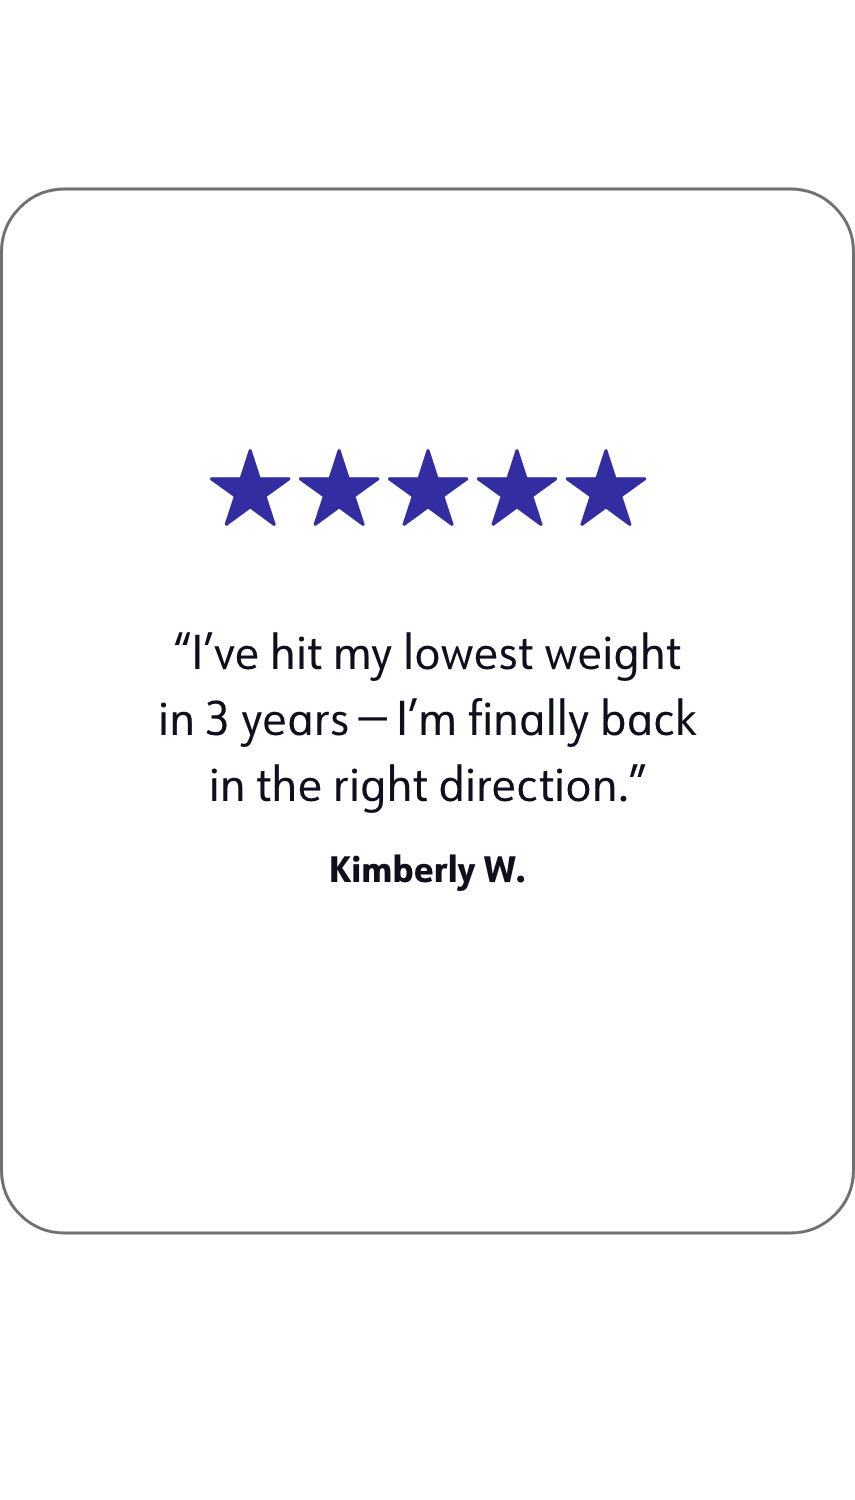 A quote of WW member Kimberly W. that says: I've hit my lowest weight in 3 years I'm finally back in the right direction.